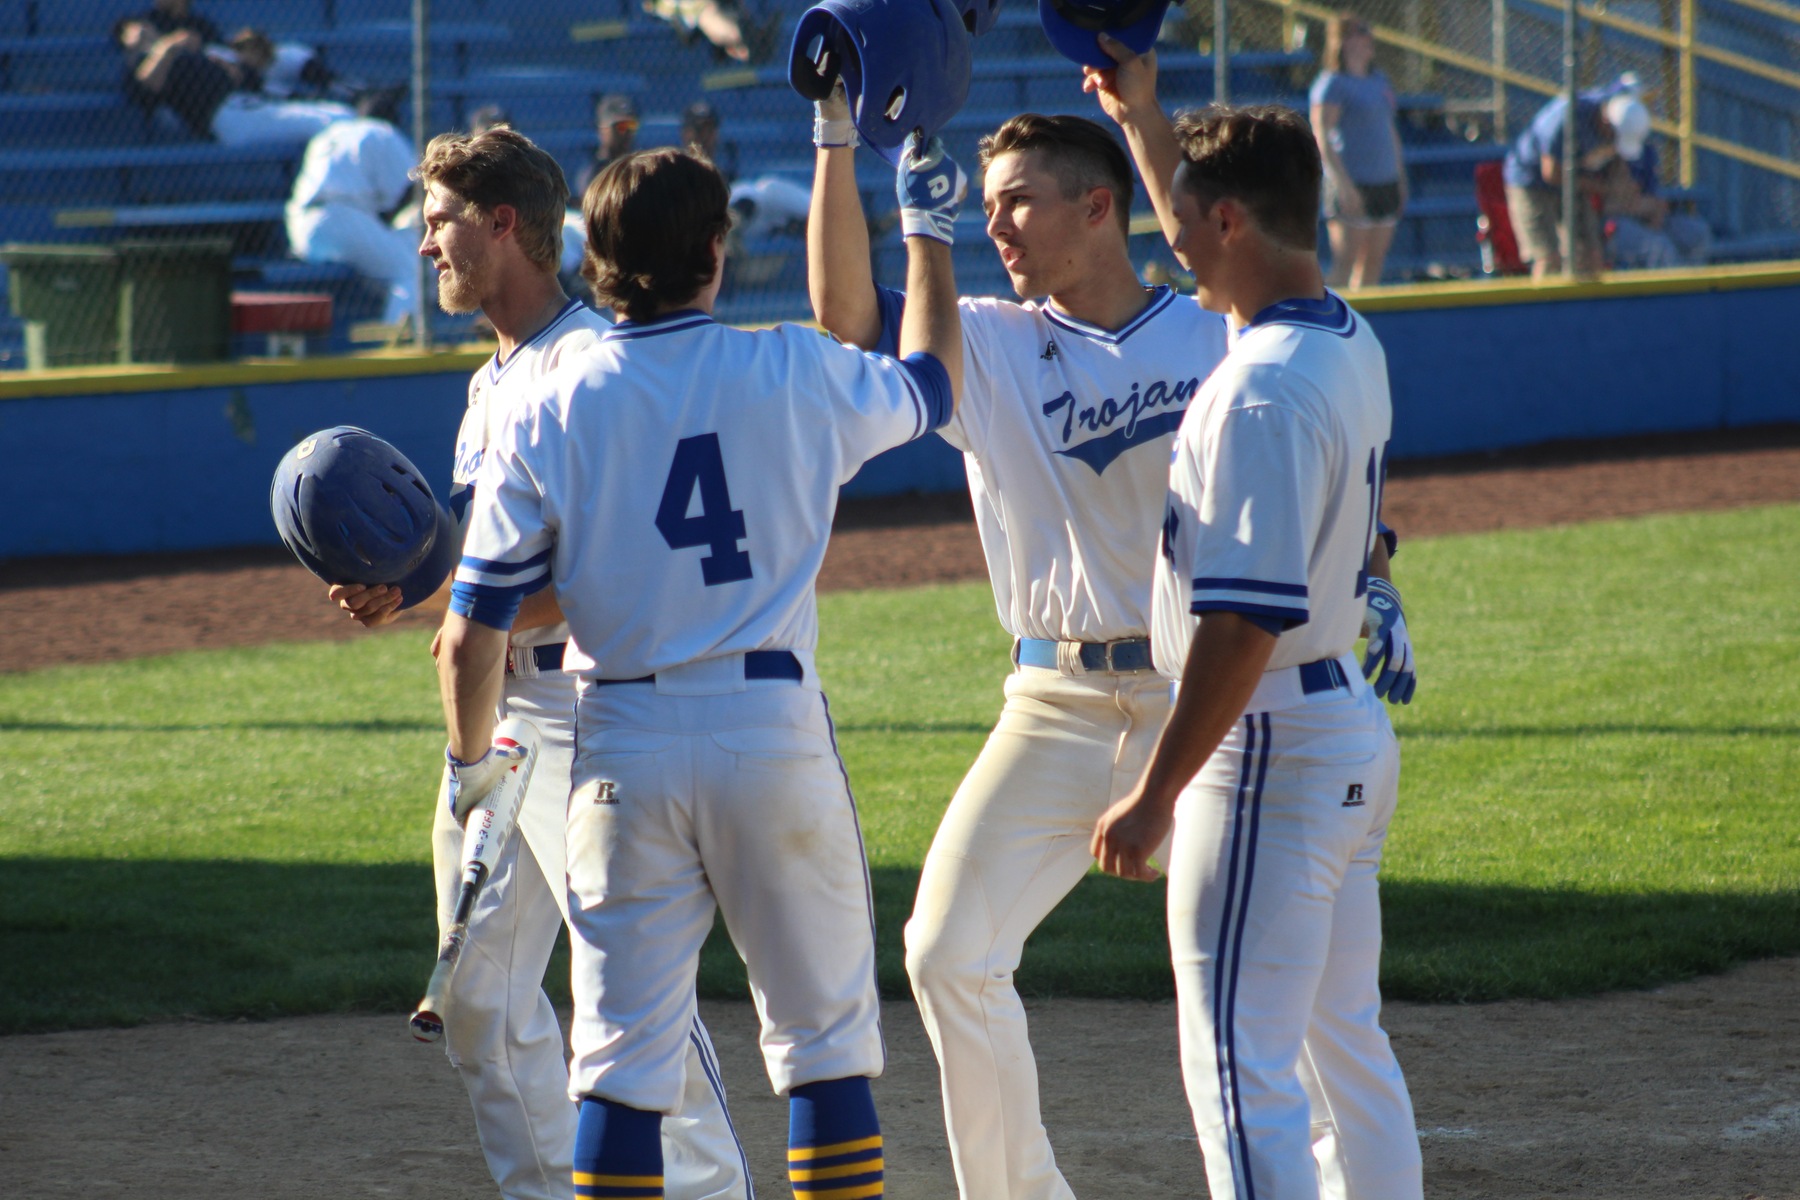 Mitch Neunborn (center) is congratulated at home plate after hitting a 3-run home run in the third inning of Friday's regional tournament game.